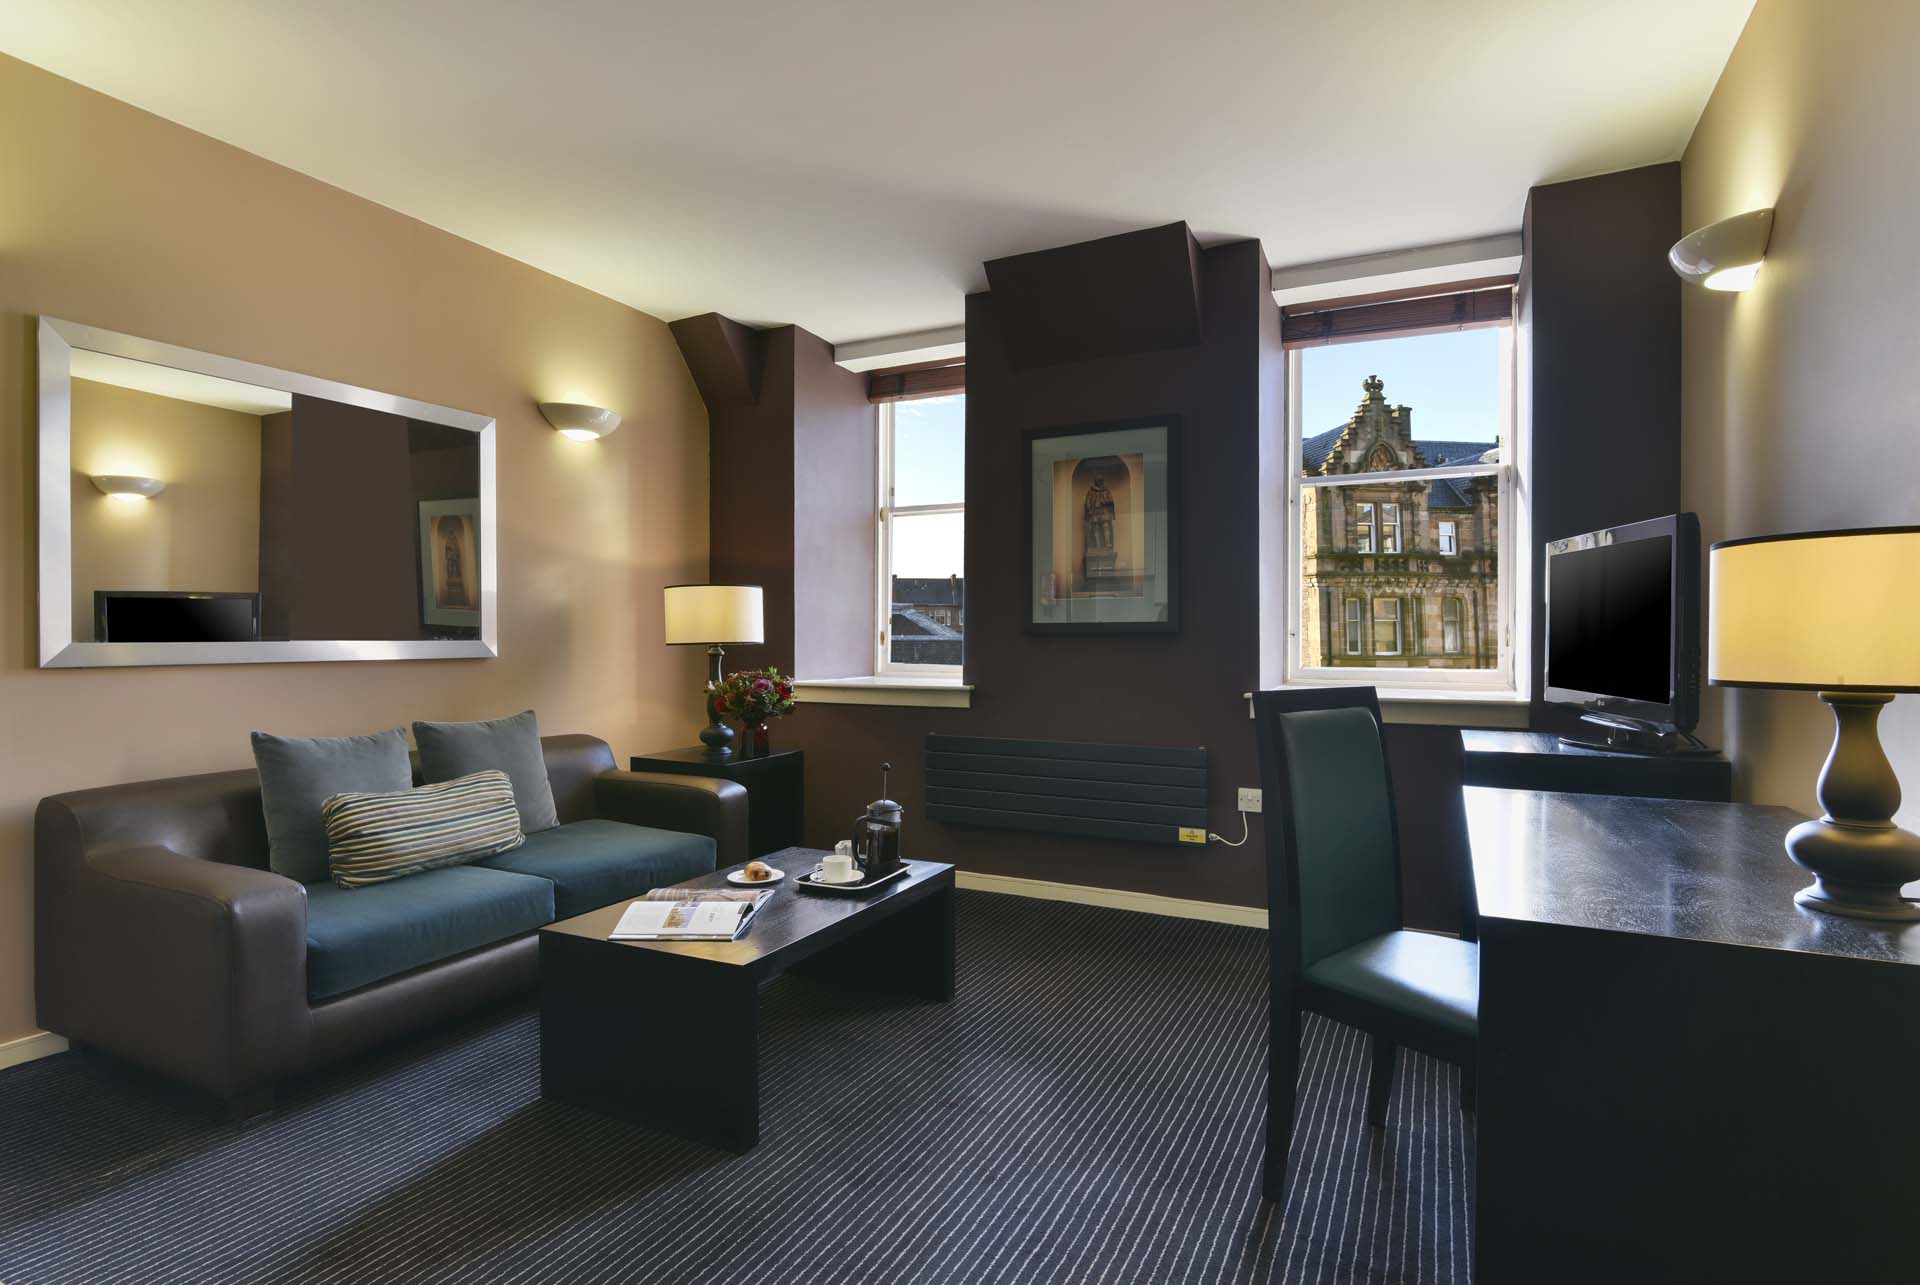 2 bedroom executive serviced apartments flat in Glasgow living area with view